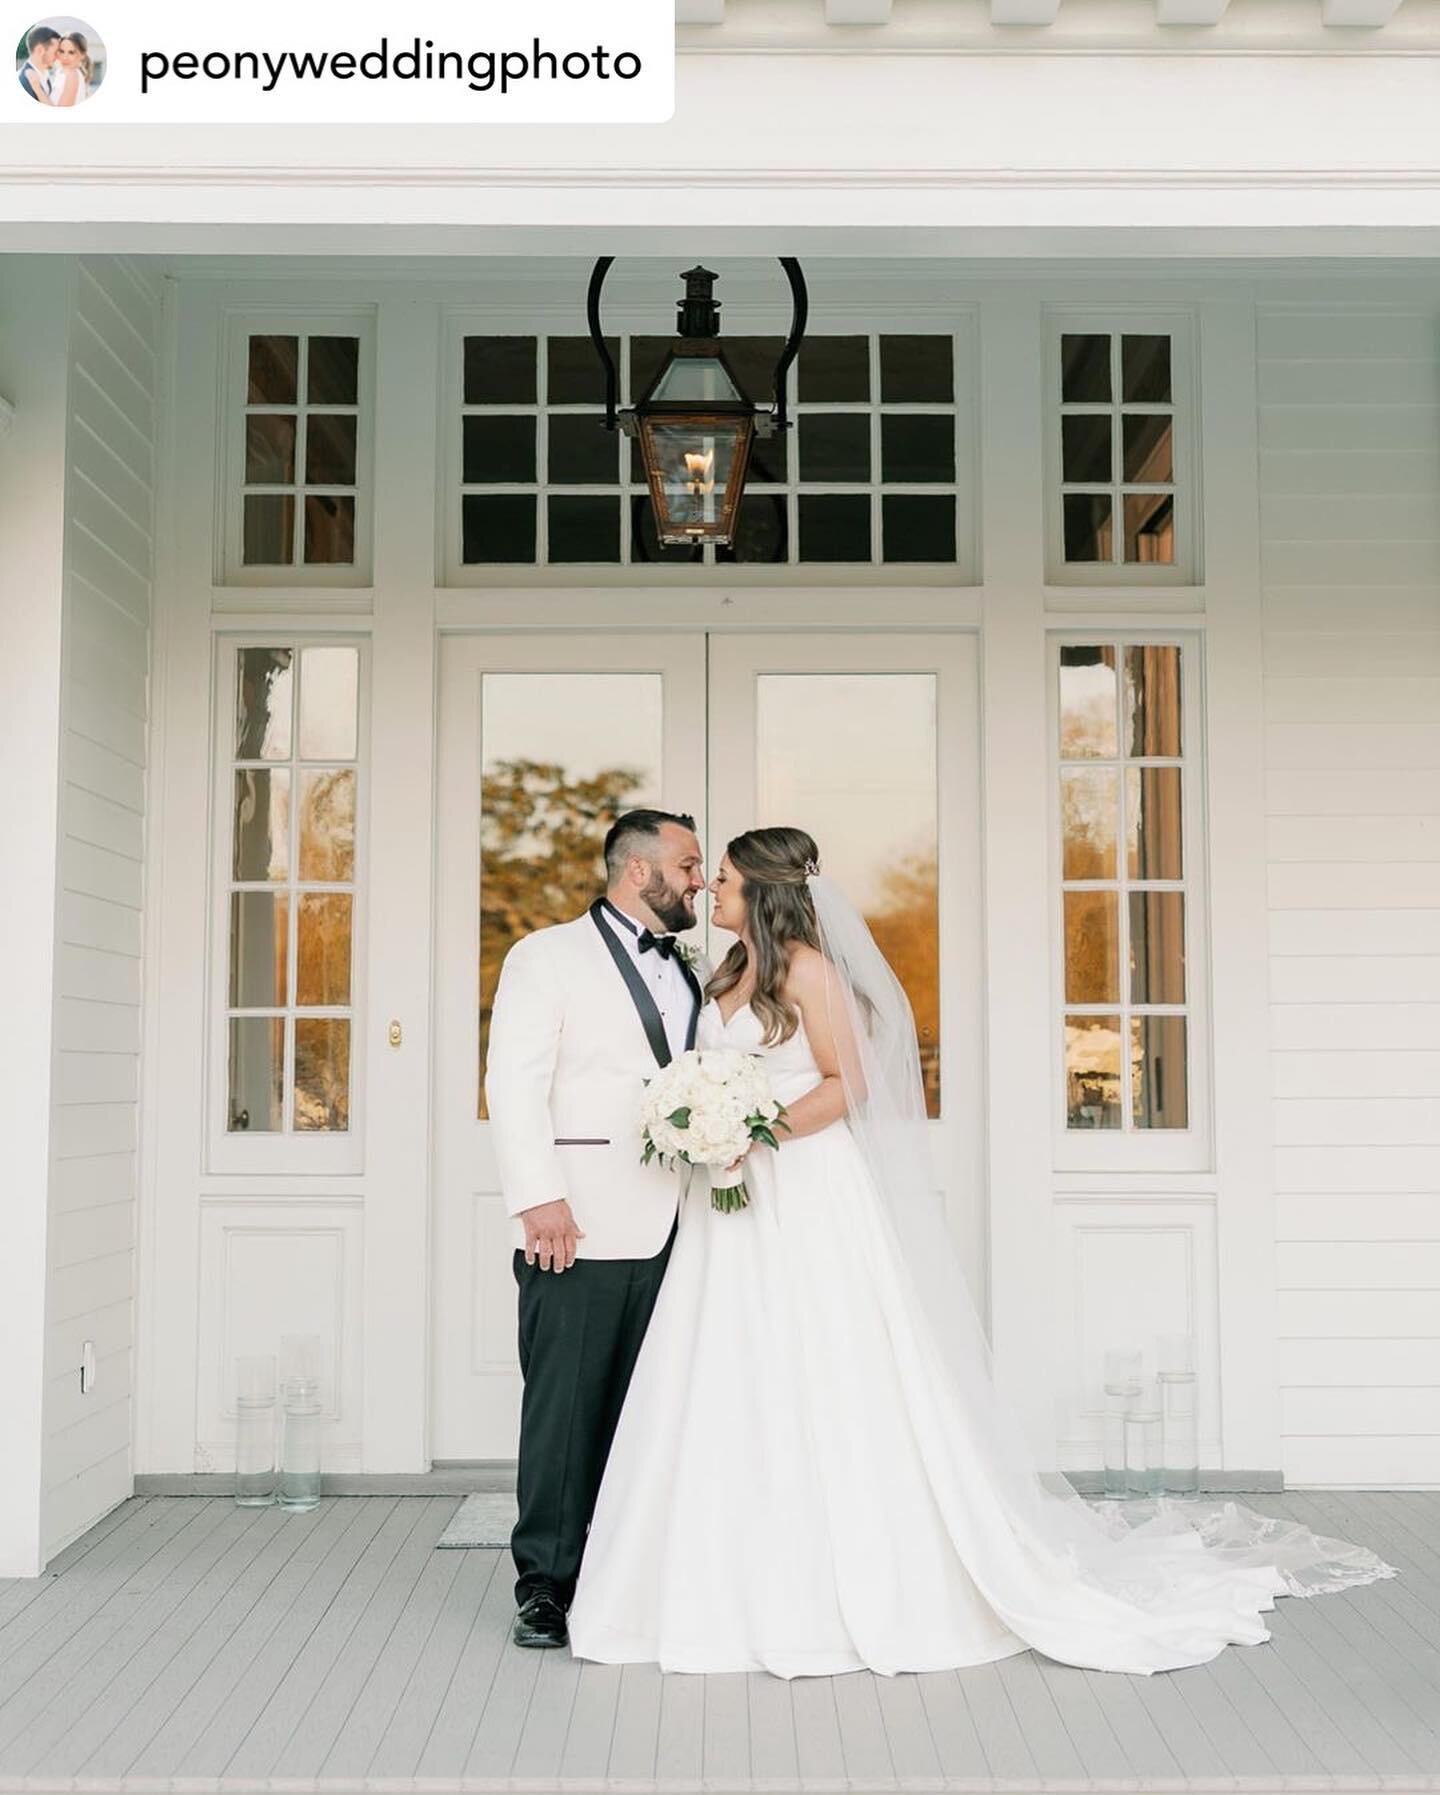 Congrats to Mr. &amp; Mrs. Rodrigue🥂 Ryan wore our Ivory &lsquo;Dawson&rsquo; by Ike Behar; one of our newest styles heading into spring.

Posted @withregram &bull; @peonyweddingphoto Today we&rsquo;re featuring this gorgeous wedding, styled to perf